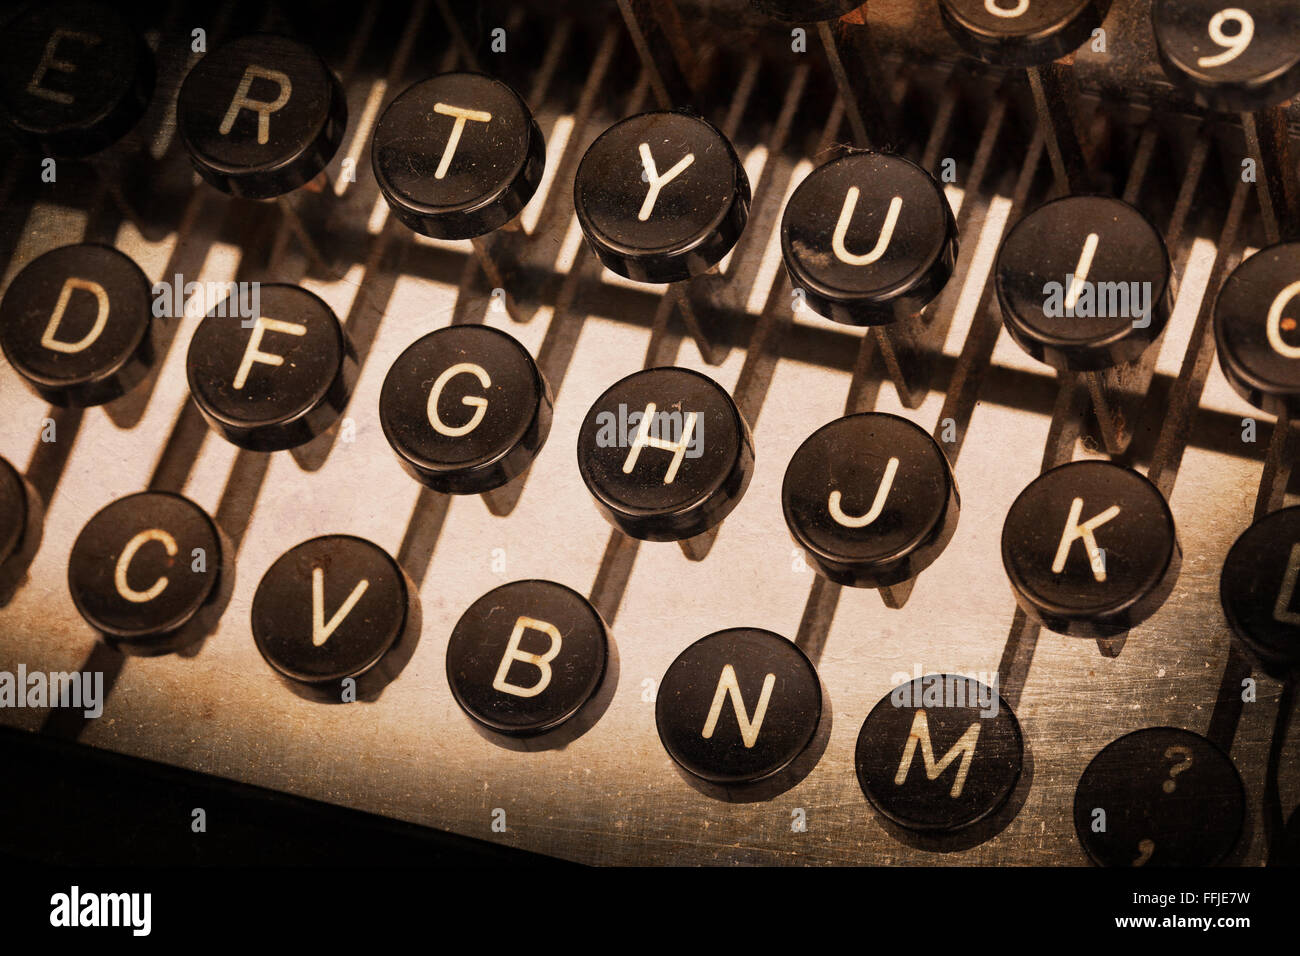 Old typewriter keyboard - Vintage image, noise and scratches Stock Photo